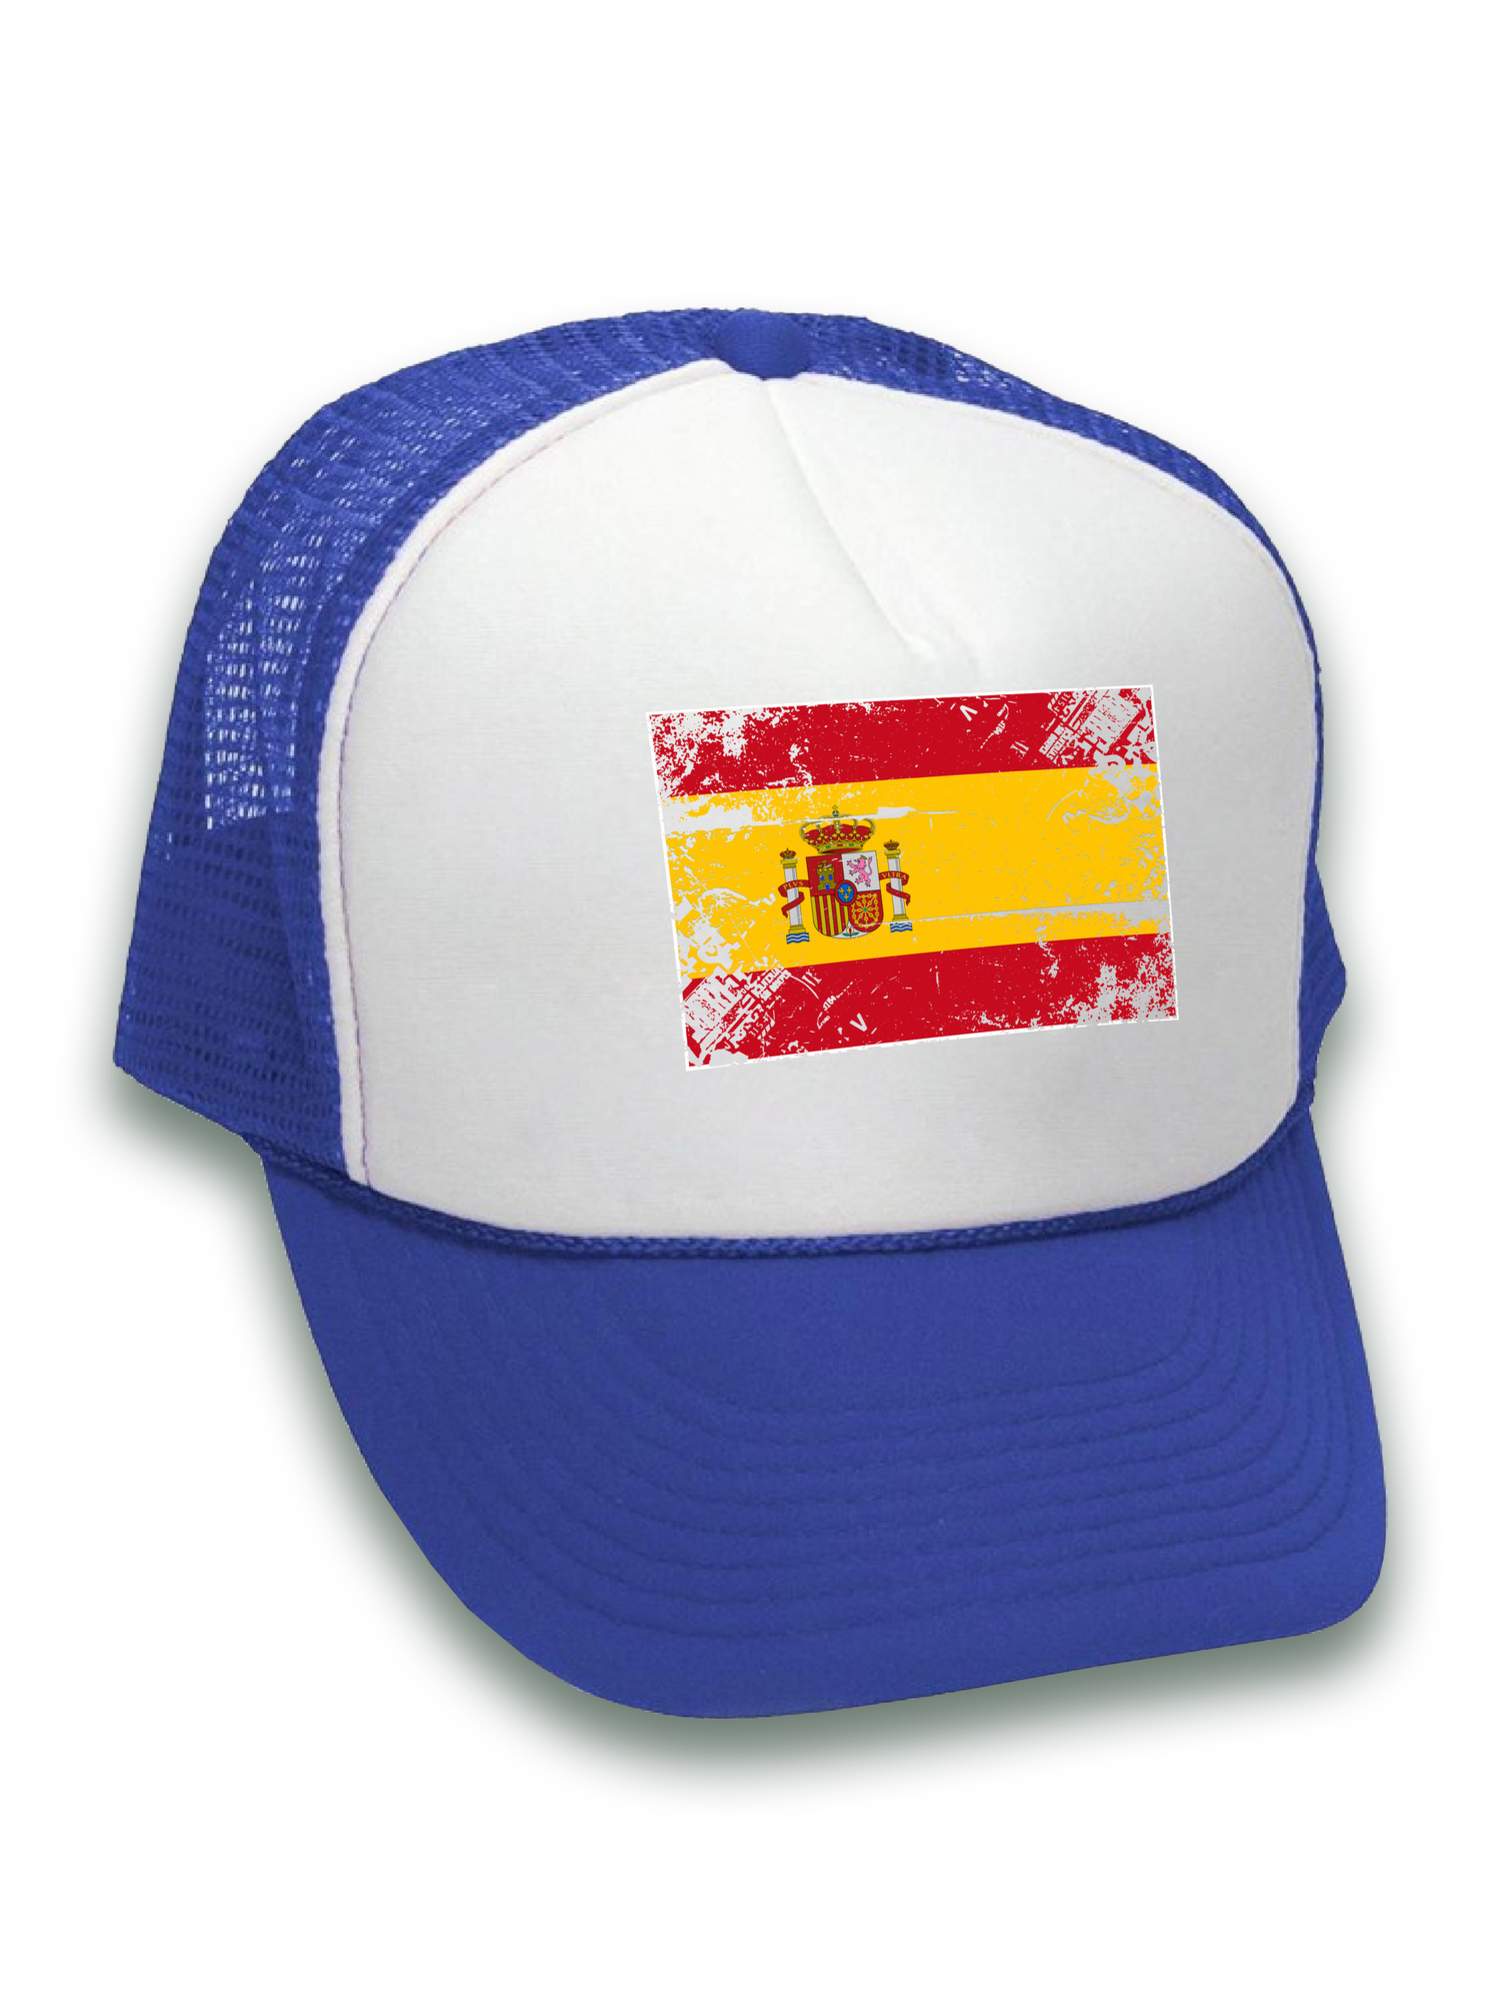 Awkward Styles Spain Flag Hat Spanish Trucker Hat Spain Baseball Cap Amazing Gifts from Spain Spanish Soccer 2018 Hat Spain 2018 Hat for Men and Women Spanish Flag Snapback Hats Spain Gifts - image 2 of 6